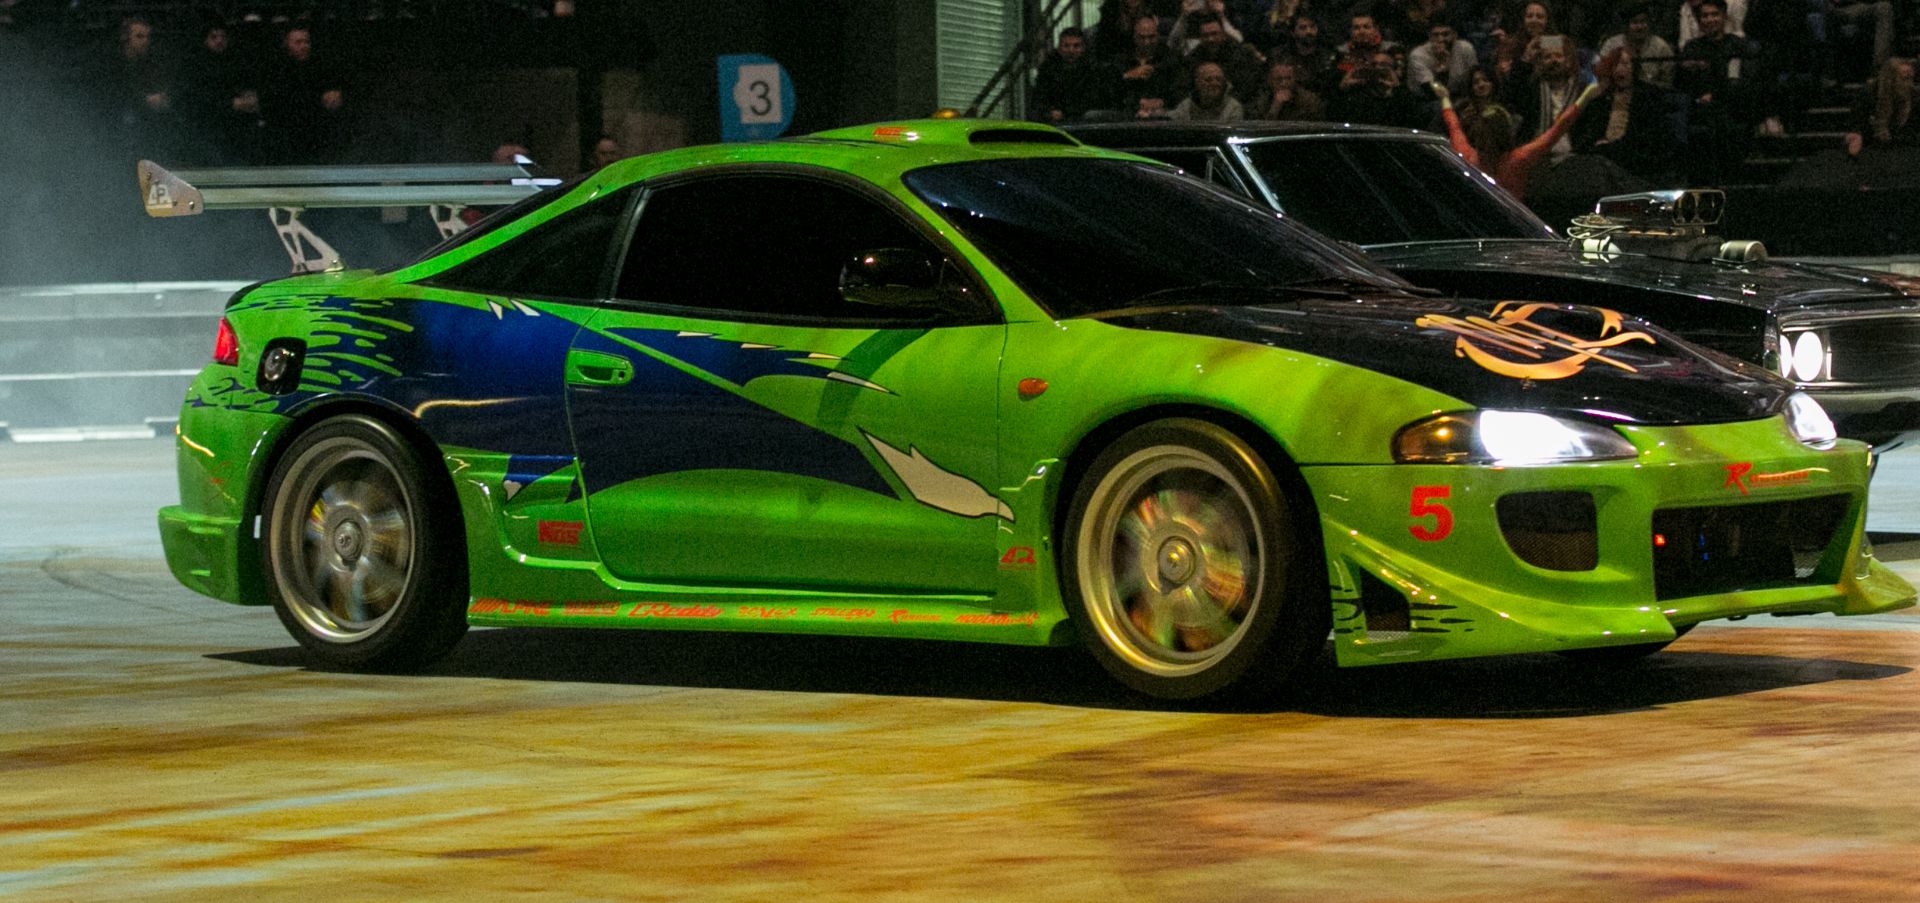 Modified Mitsubishi Eclipse Electric 2 Door Coupe, “Asylum” Special Effects Electrical System,